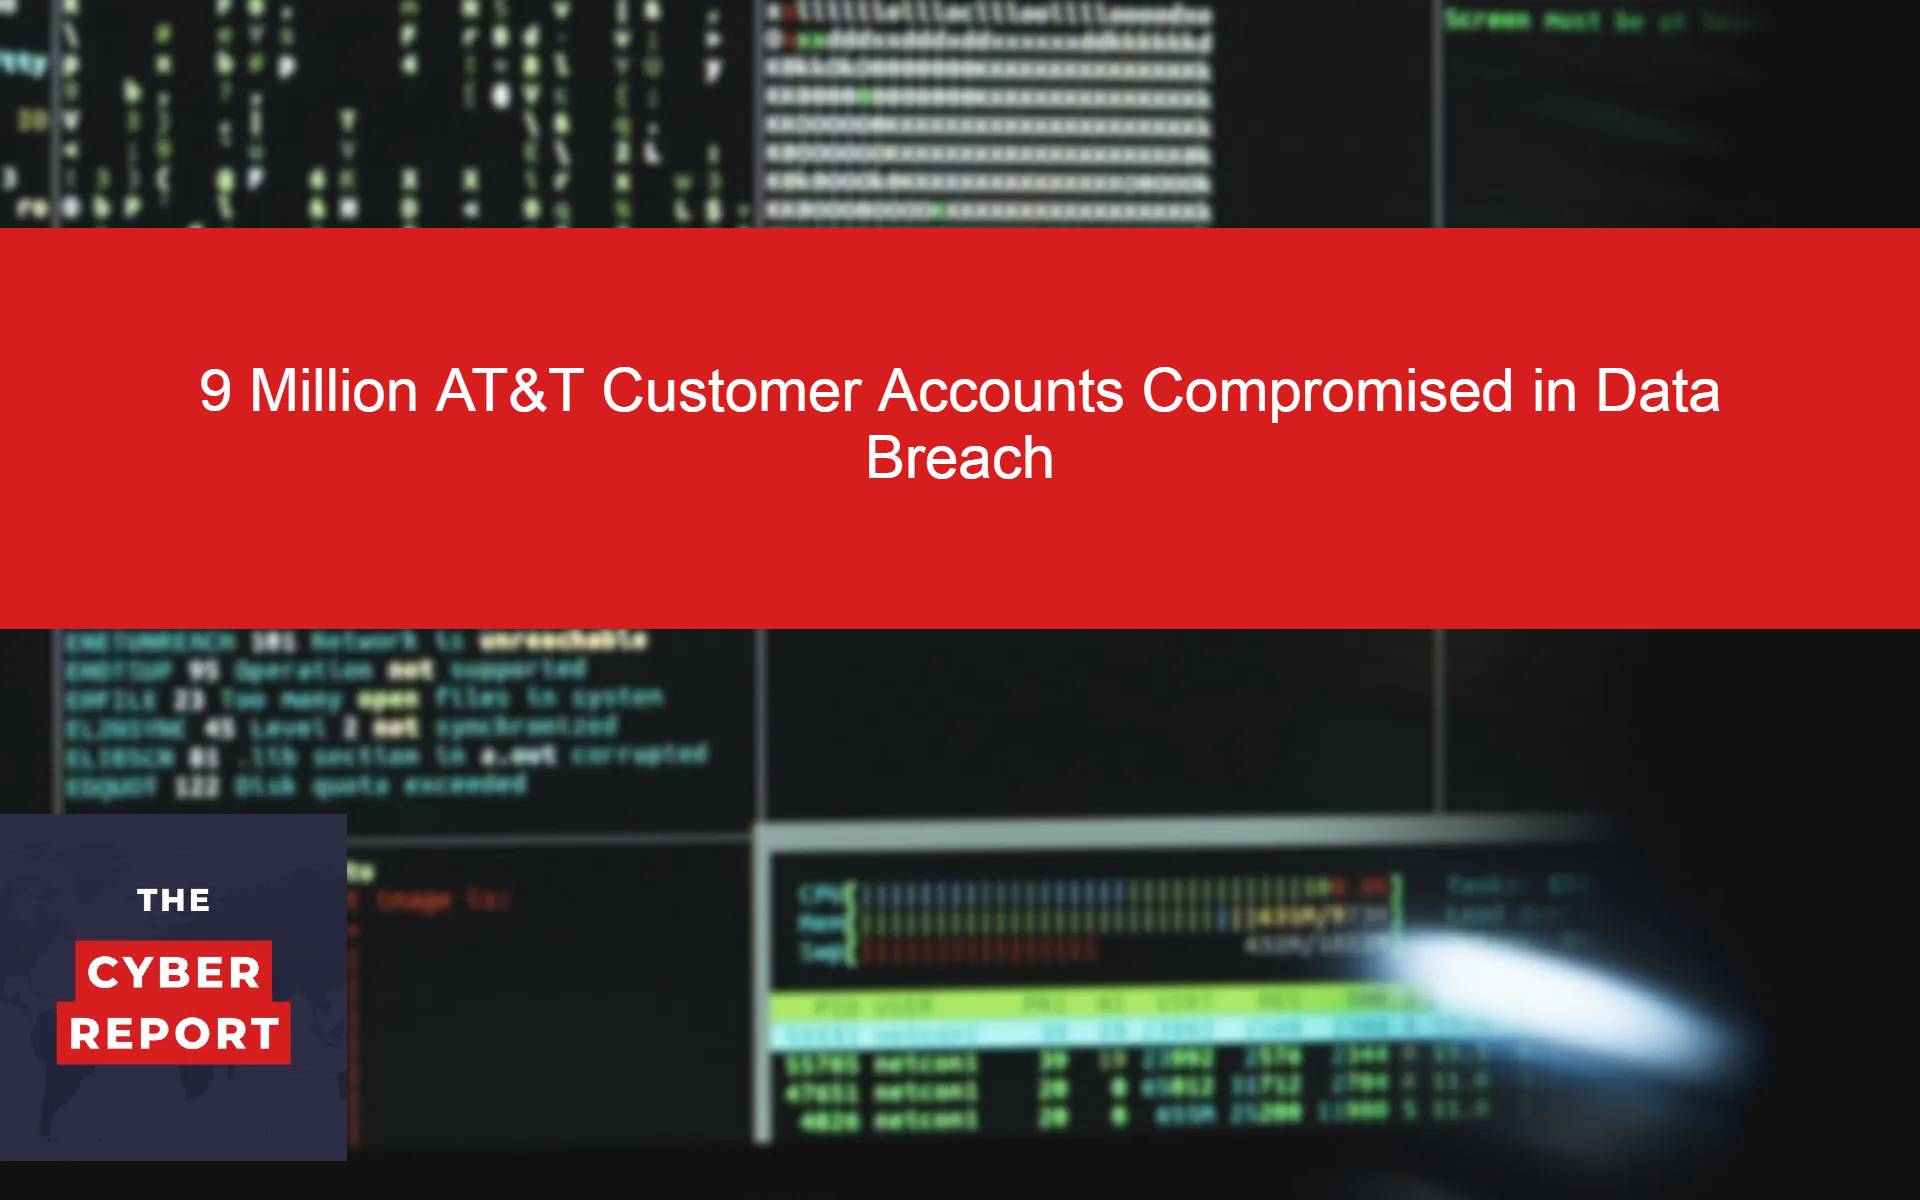 9 Million AT&T Customer Accounts Compromised in Data Breach